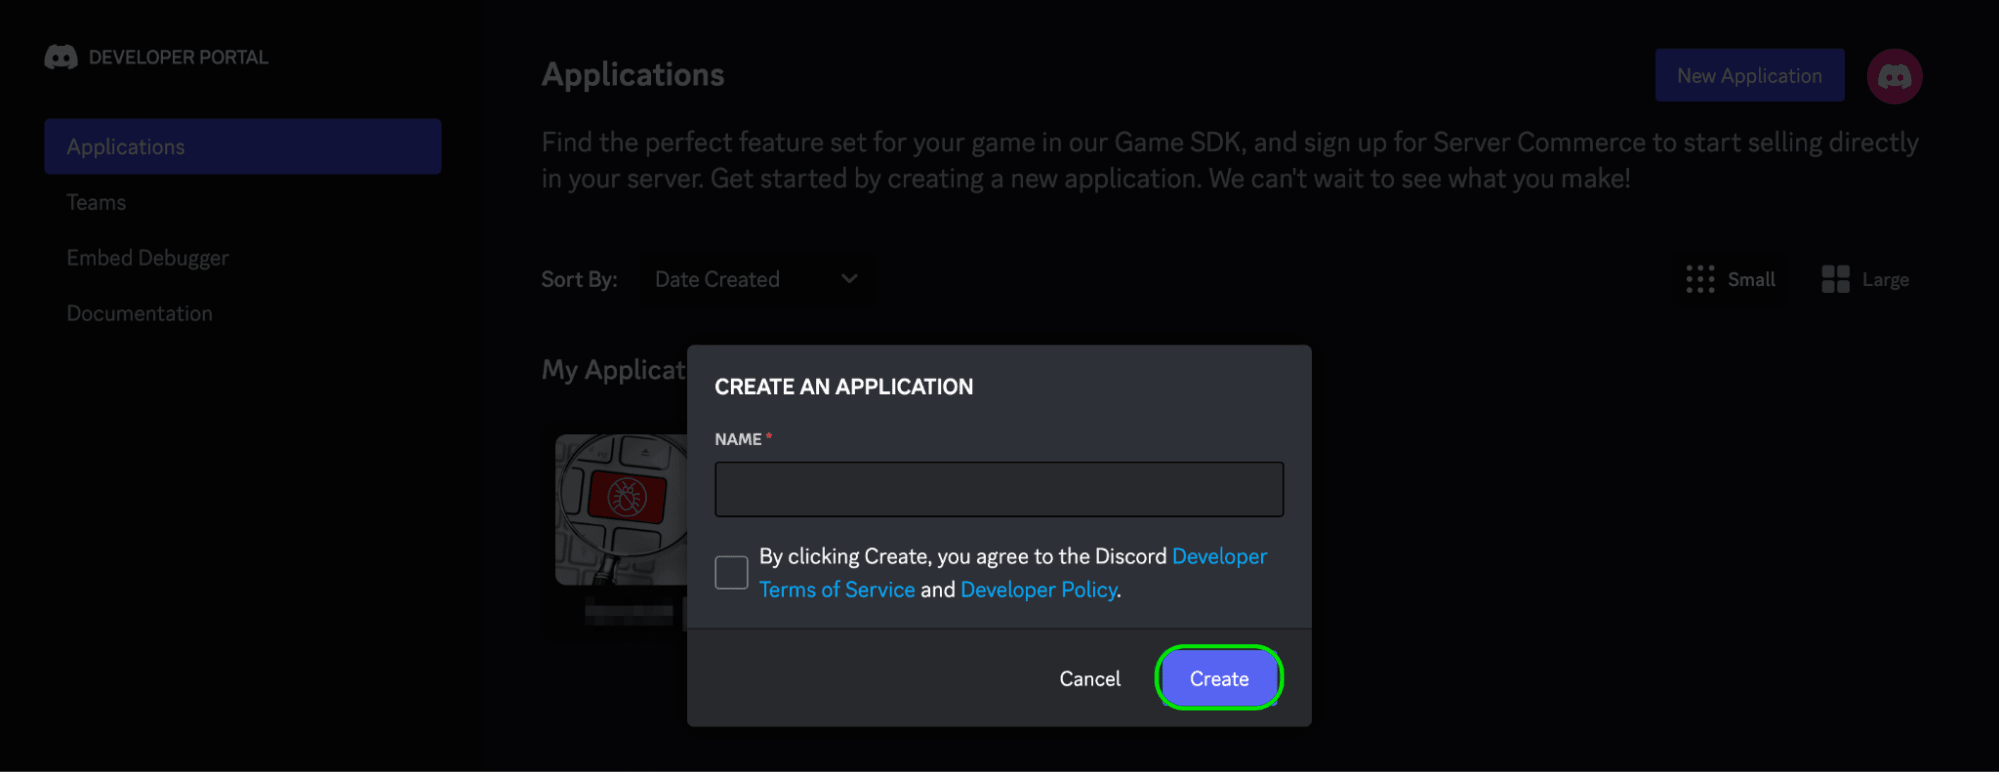 Image of the create an application in Discord